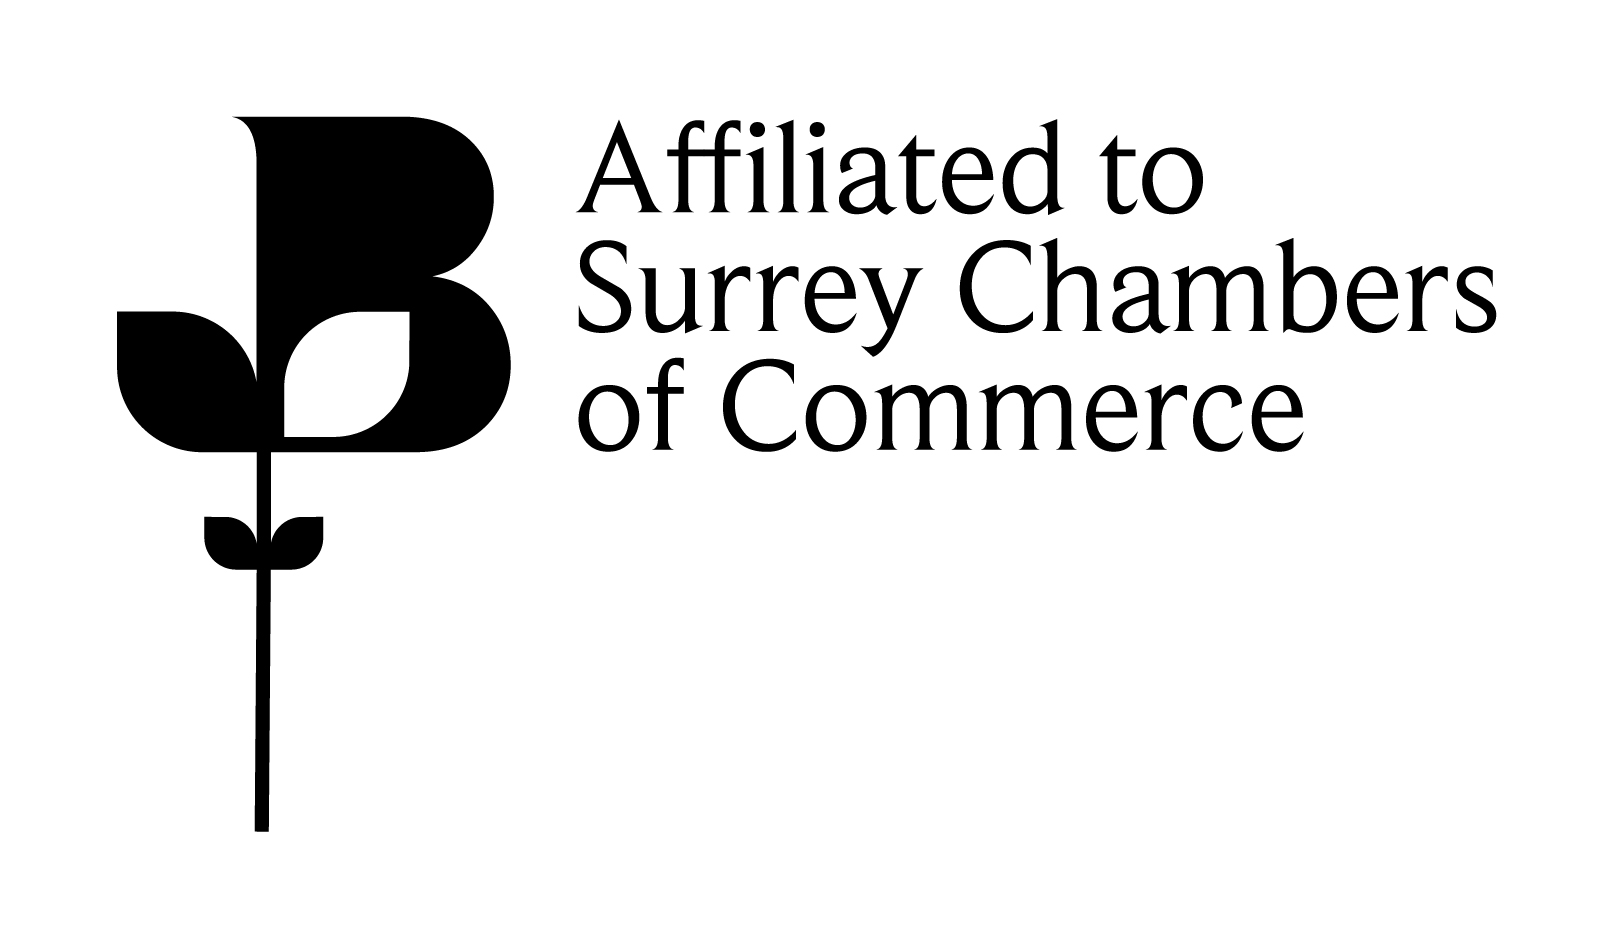 Affiliated to Surrey Chambers of Commerce